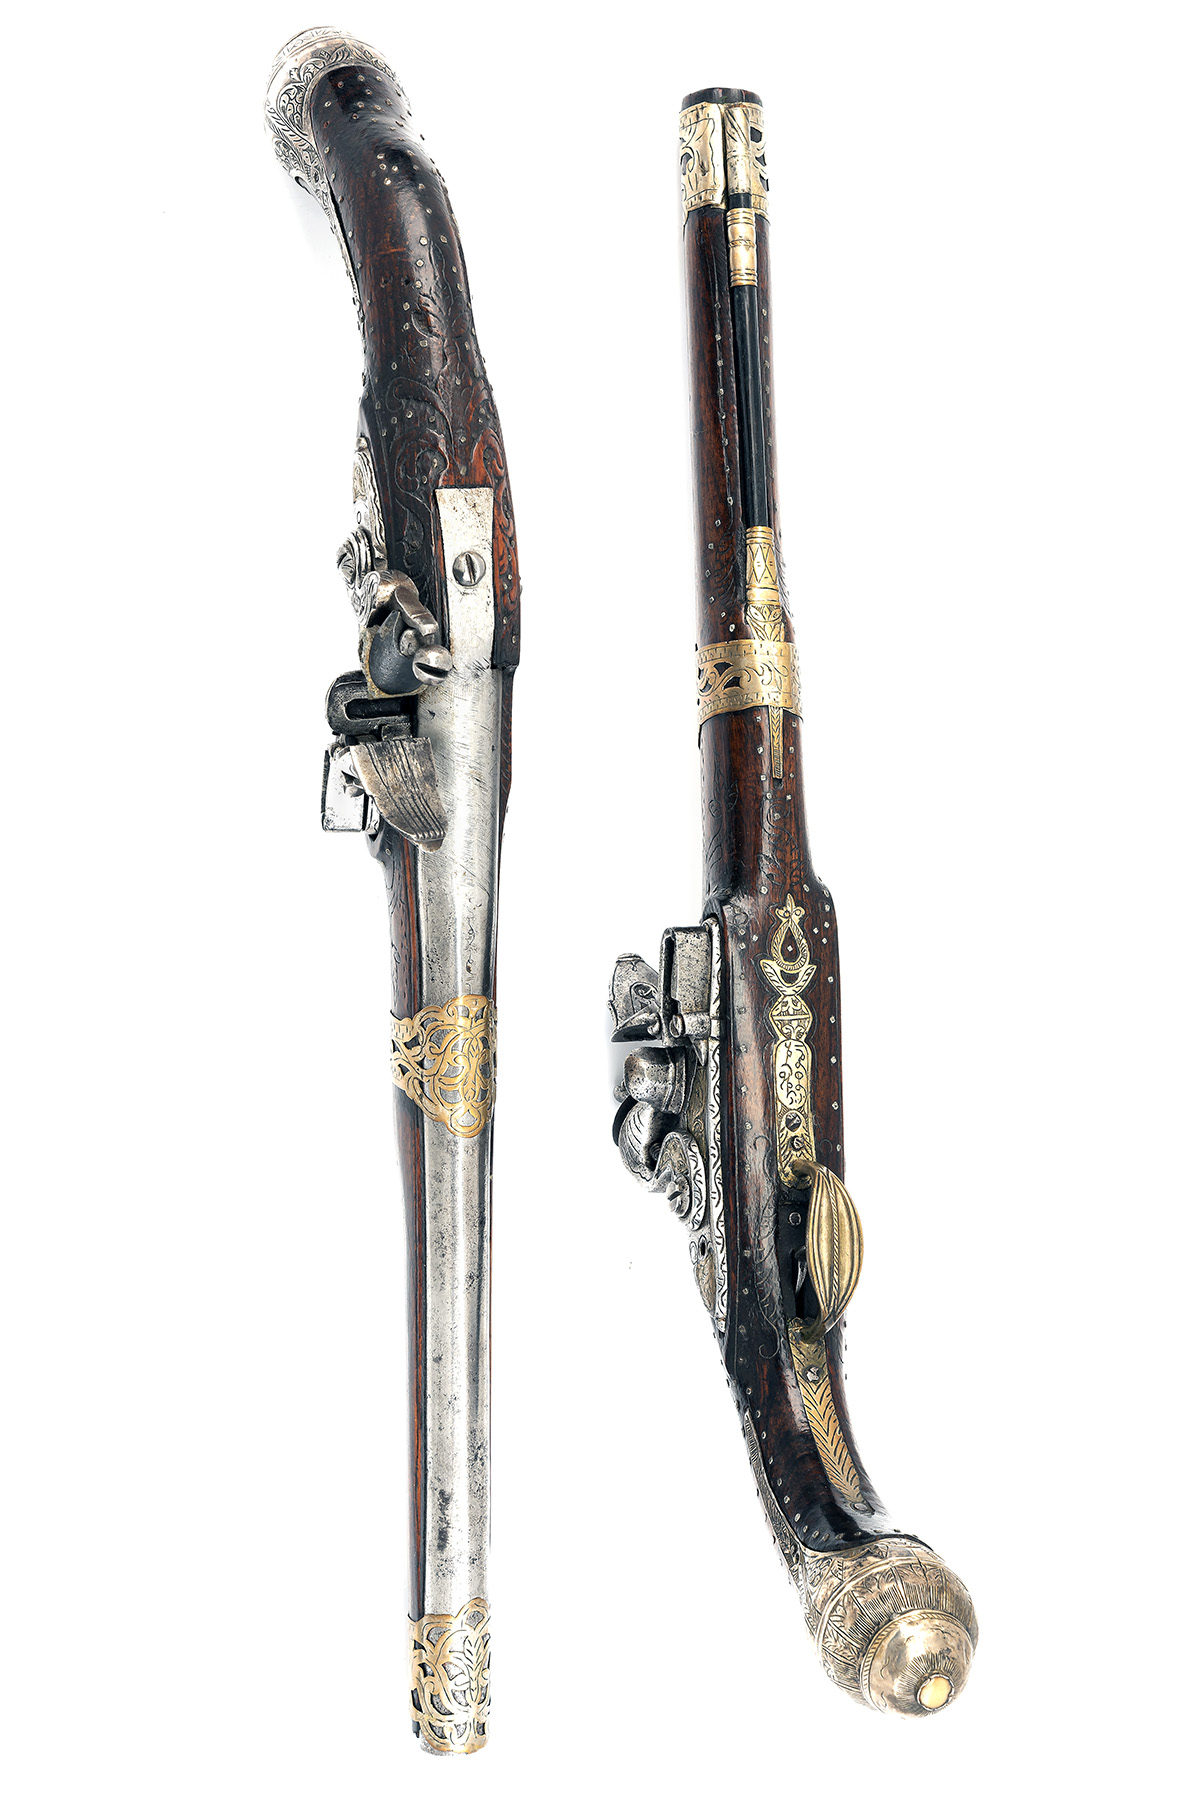 A WELL COMPOSED PAIR OF 16-BORE FLINTLOCK INDO-PERSIAN HOLSTER-PISTOLS, UNSIGNED, no visible - Image 3 of 6